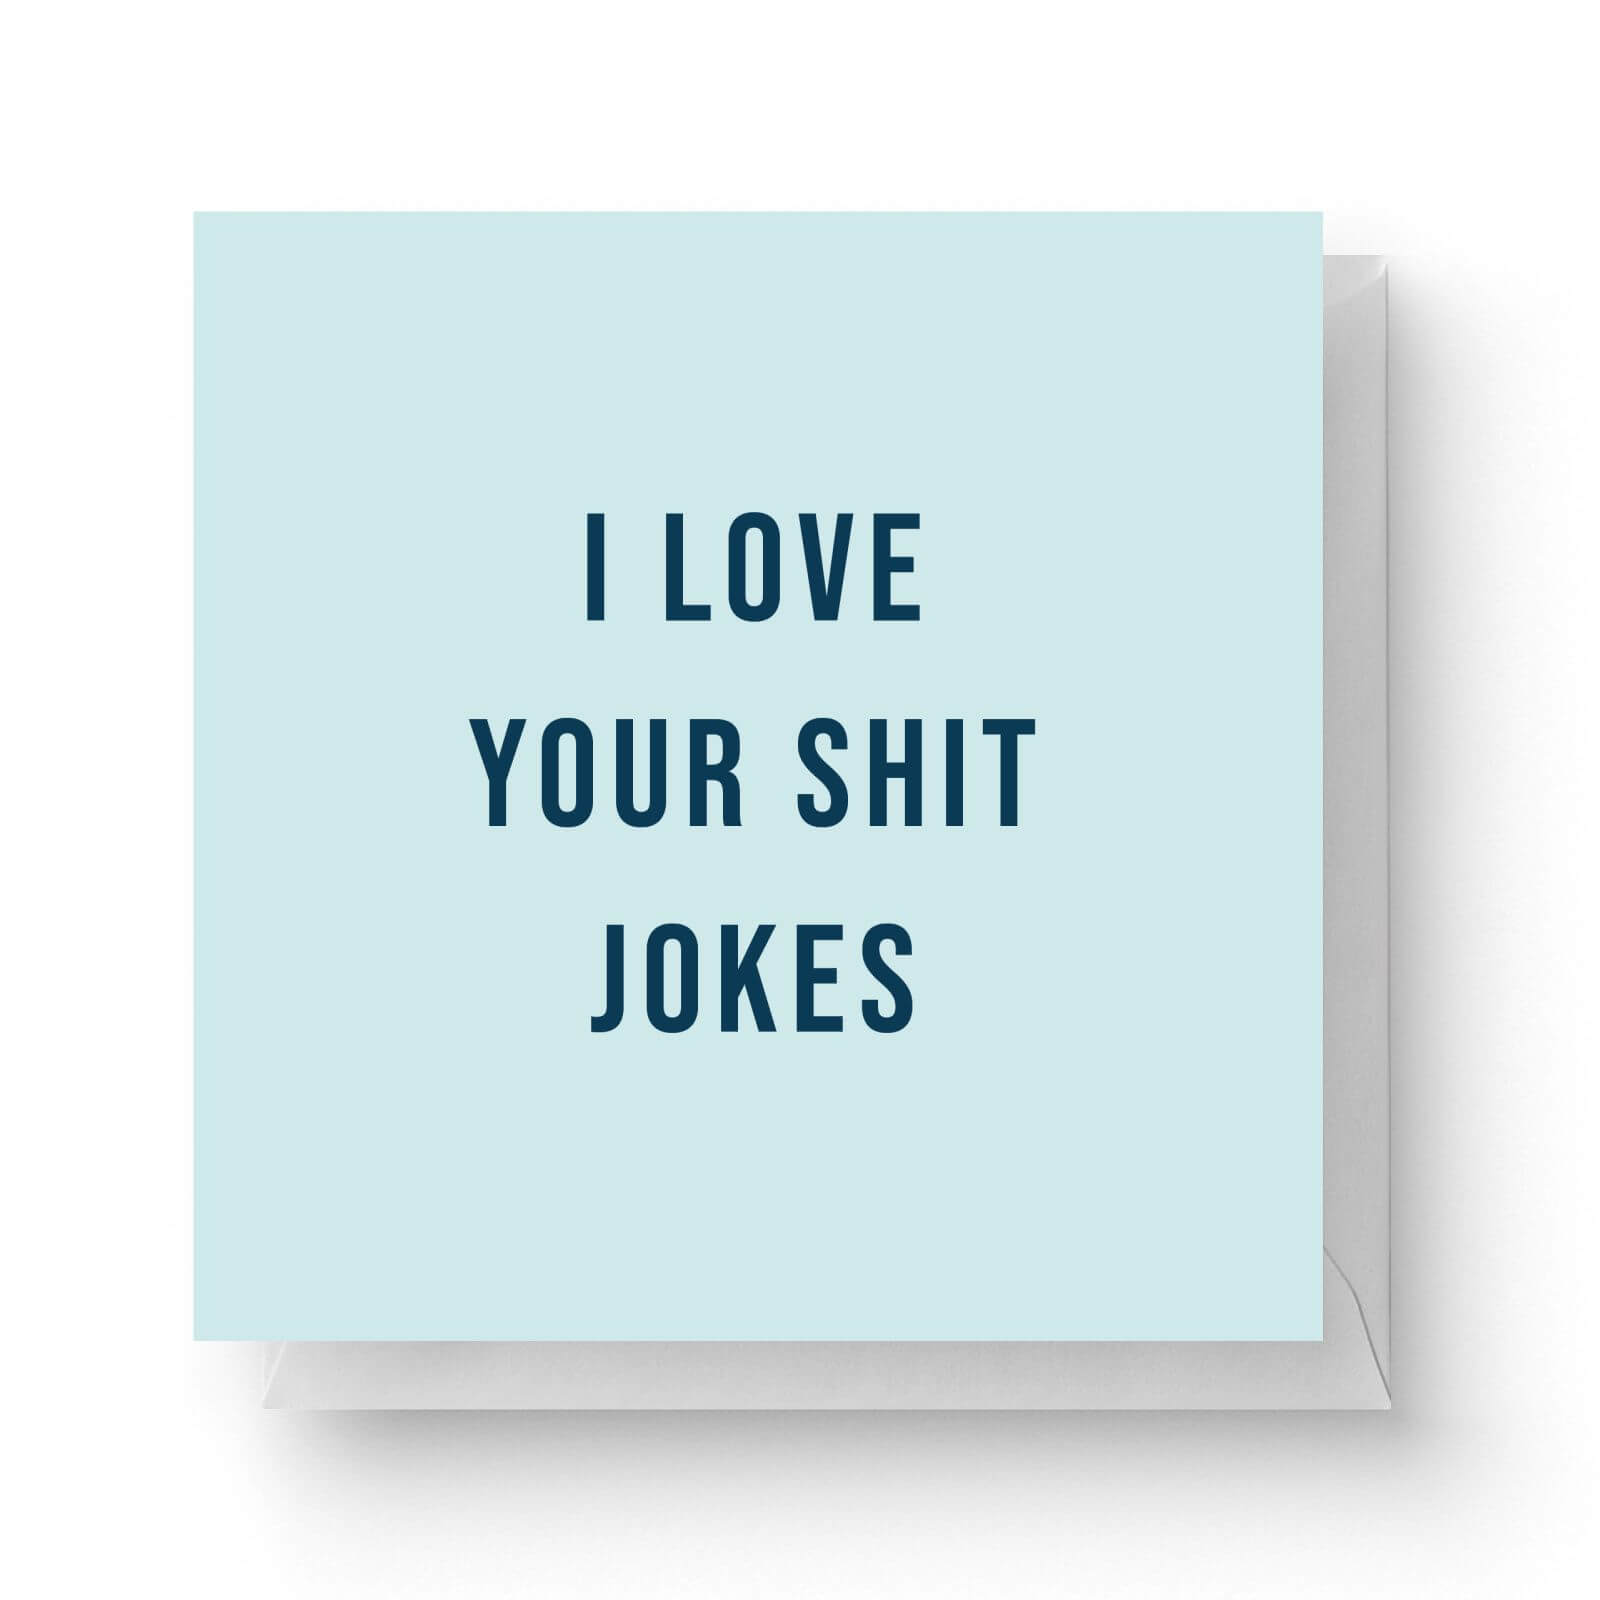 Image of I Love Your Shit Jokes Square Greetings Card (14.8cm x 14.8cm)